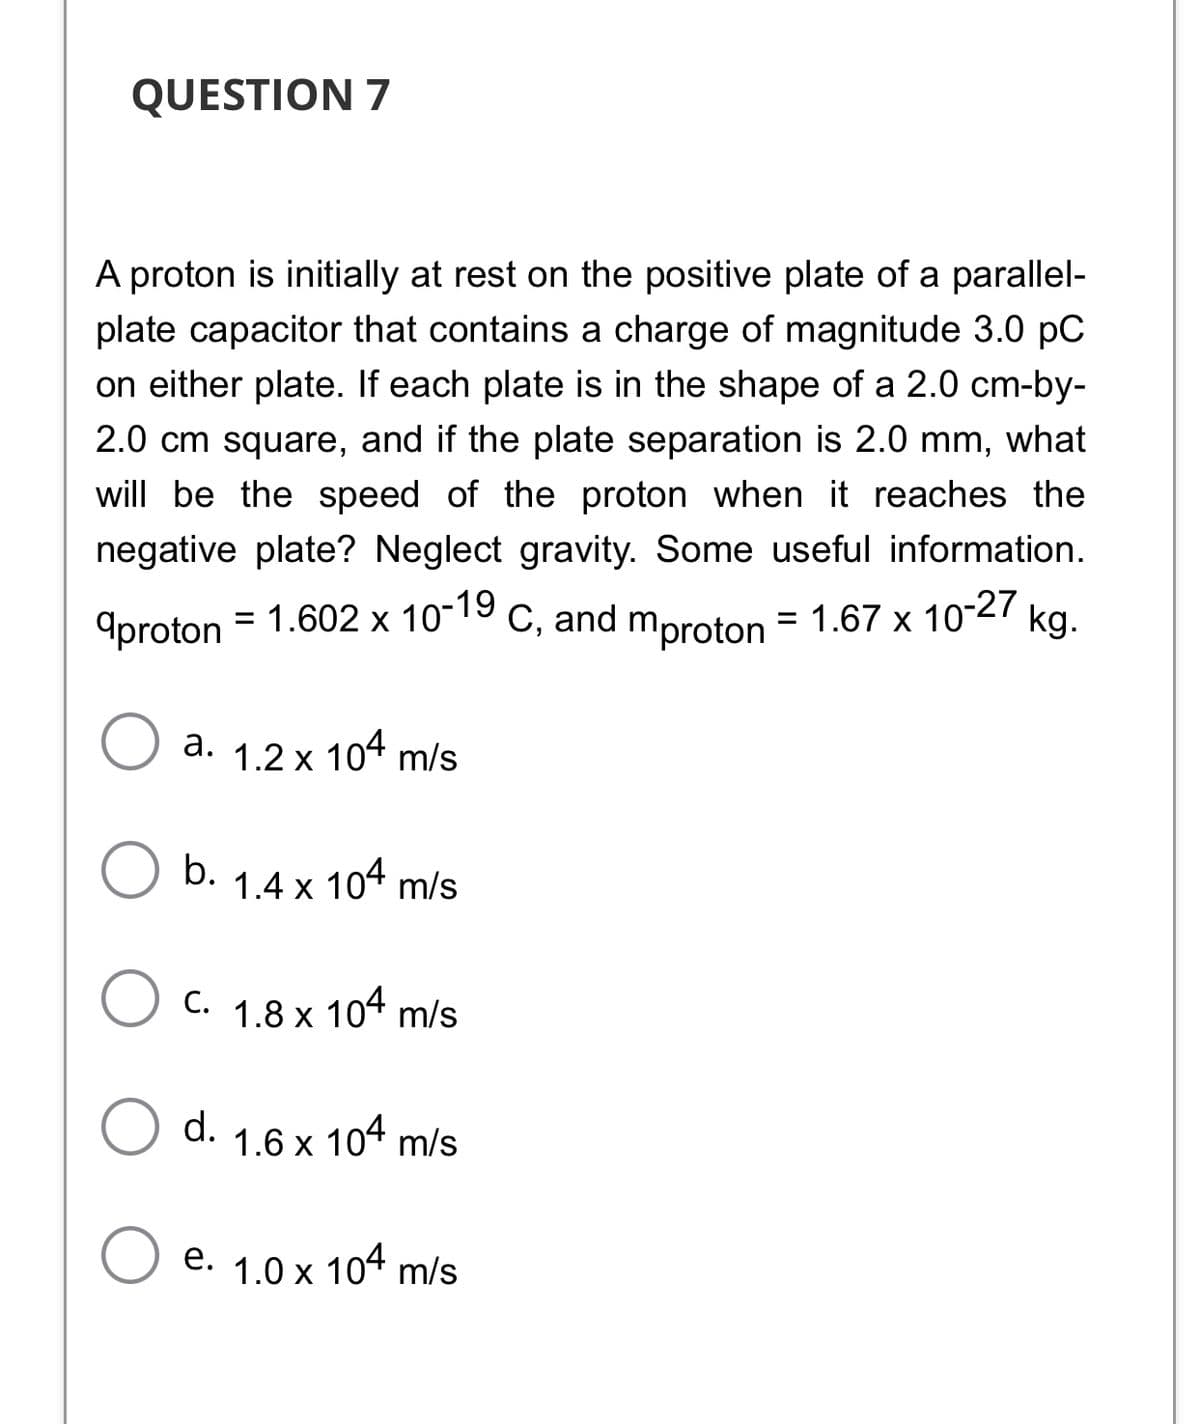 QUESTION 7
A proton is initially at rest on the positive plate of a parallel-
plate capacitor that contains a charge of magnitude 3.0 pC
on either plate. If each plate is in the shape of a 2.0 cm-by-
2.0 cm square, and if the plate separation is 2.0 mm, what
will be the speed of the proton when it reaches the
negative plate? Neglect gravity. Some useful information.
9proton = 1.602 x 10-19
C, and mproton =
= 1.67 x 10-27 kg.
a. 1.2 x 104 m/s
b. 1.4 x 104 m/s
С.
1.8 x
104 m/s
d. 1.6 x 104 m/s
е. 1.0х 104 m/s
